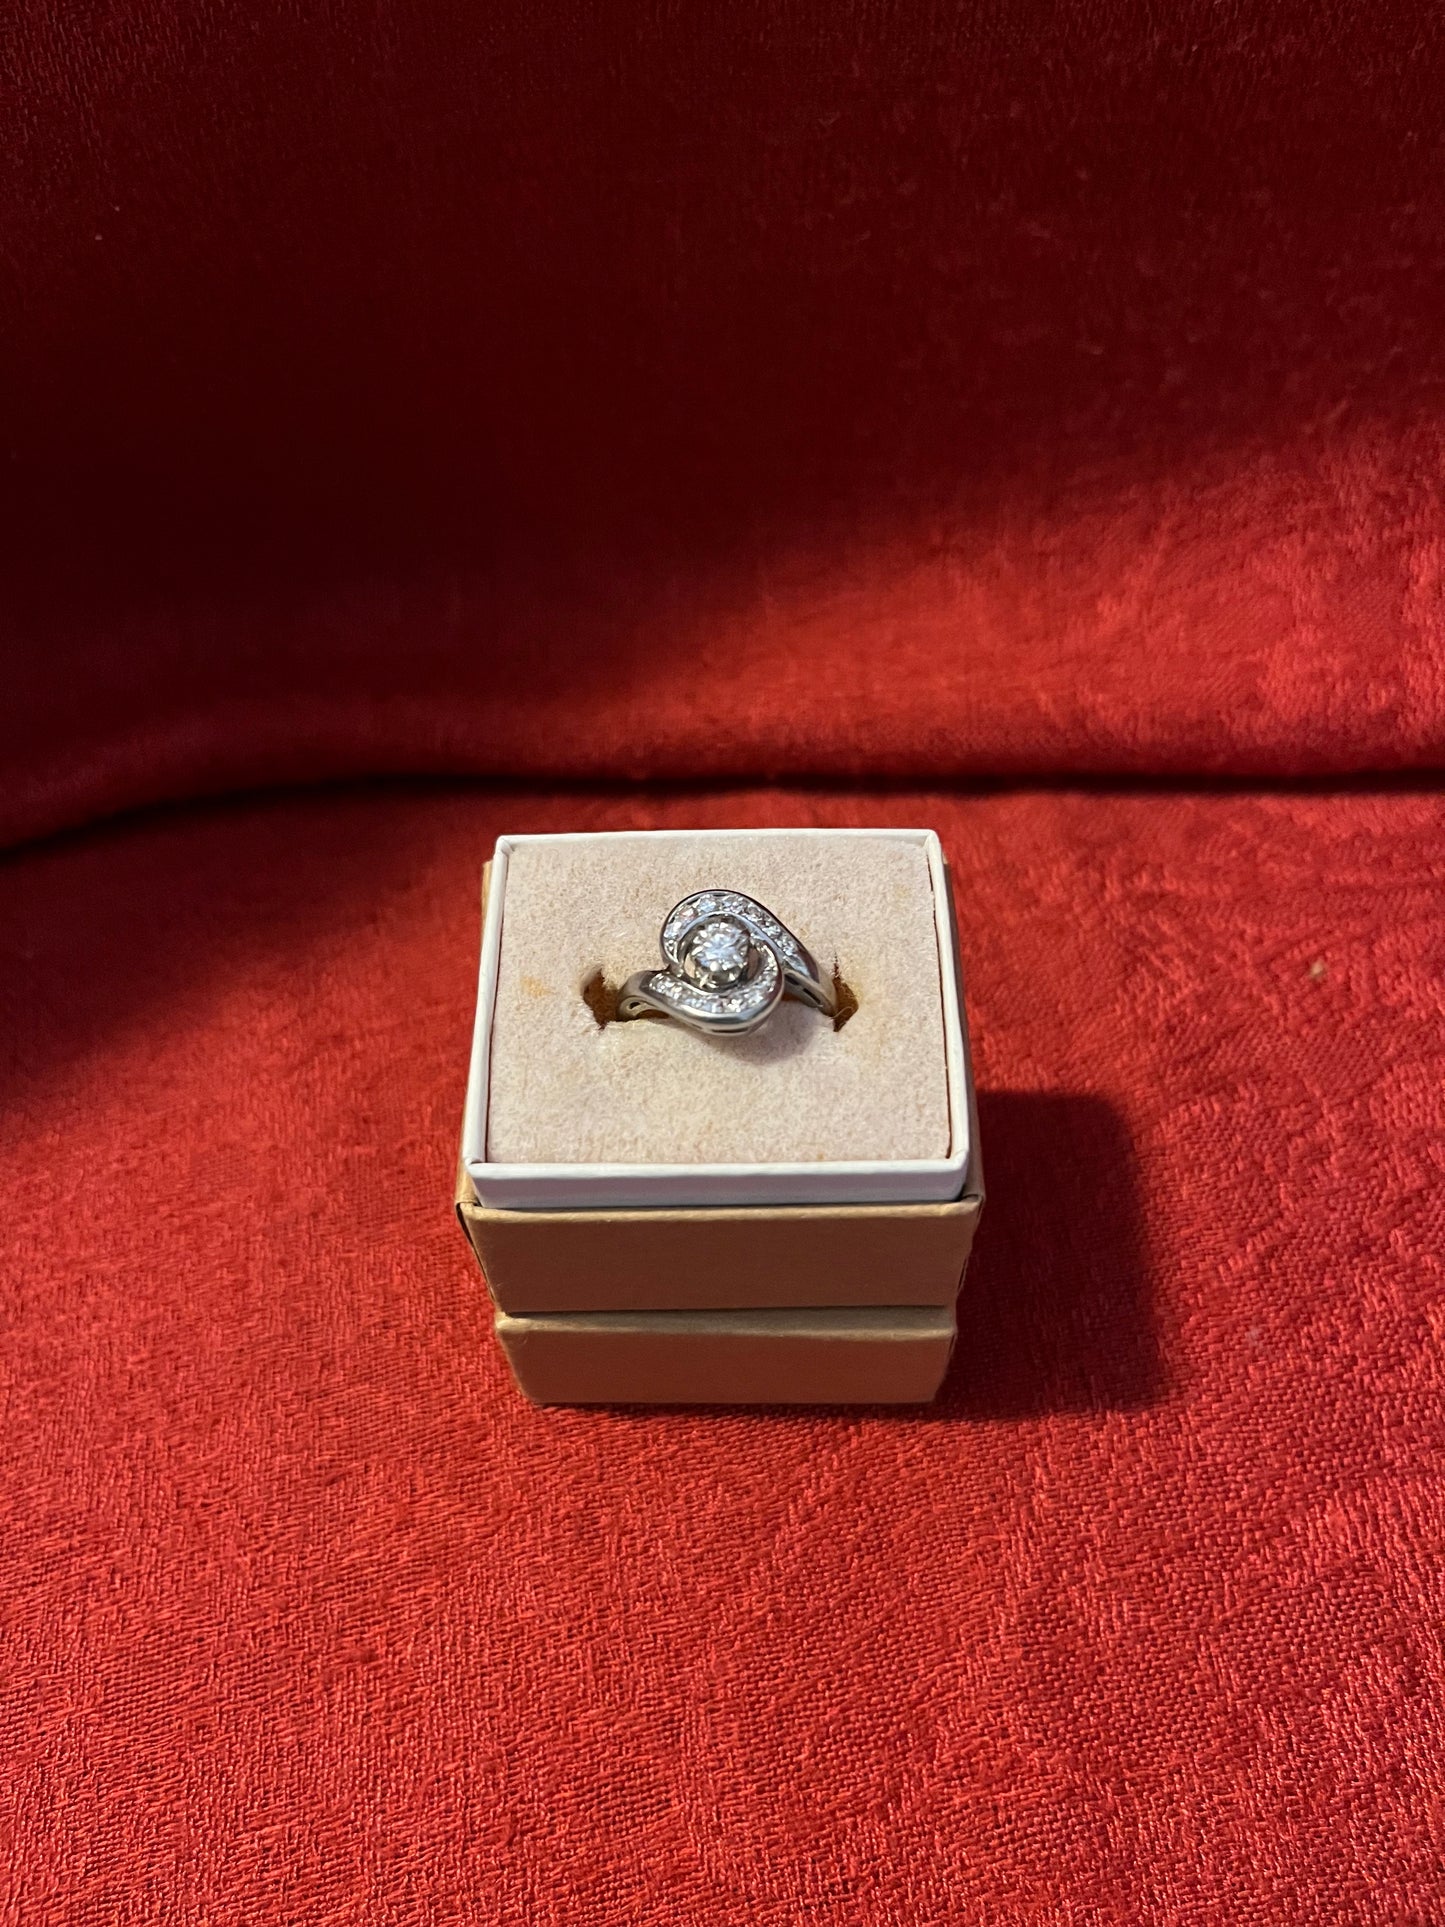 Vintage 18KT White Gold and Diamond Cocktail Ring-Size 5